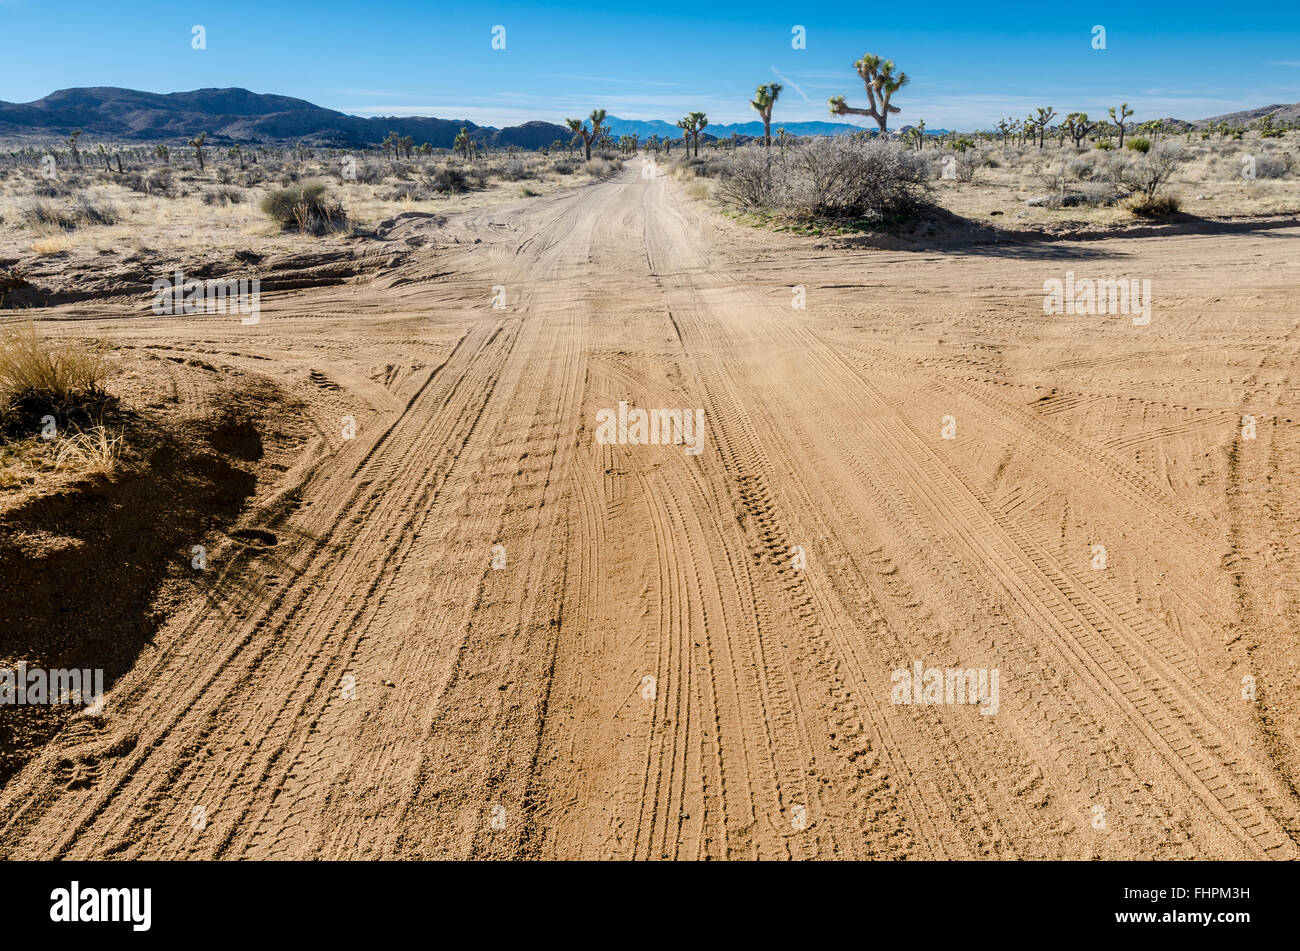 Desert cross roads with car tracks and Joshua trees in backgrounds Stock Photo